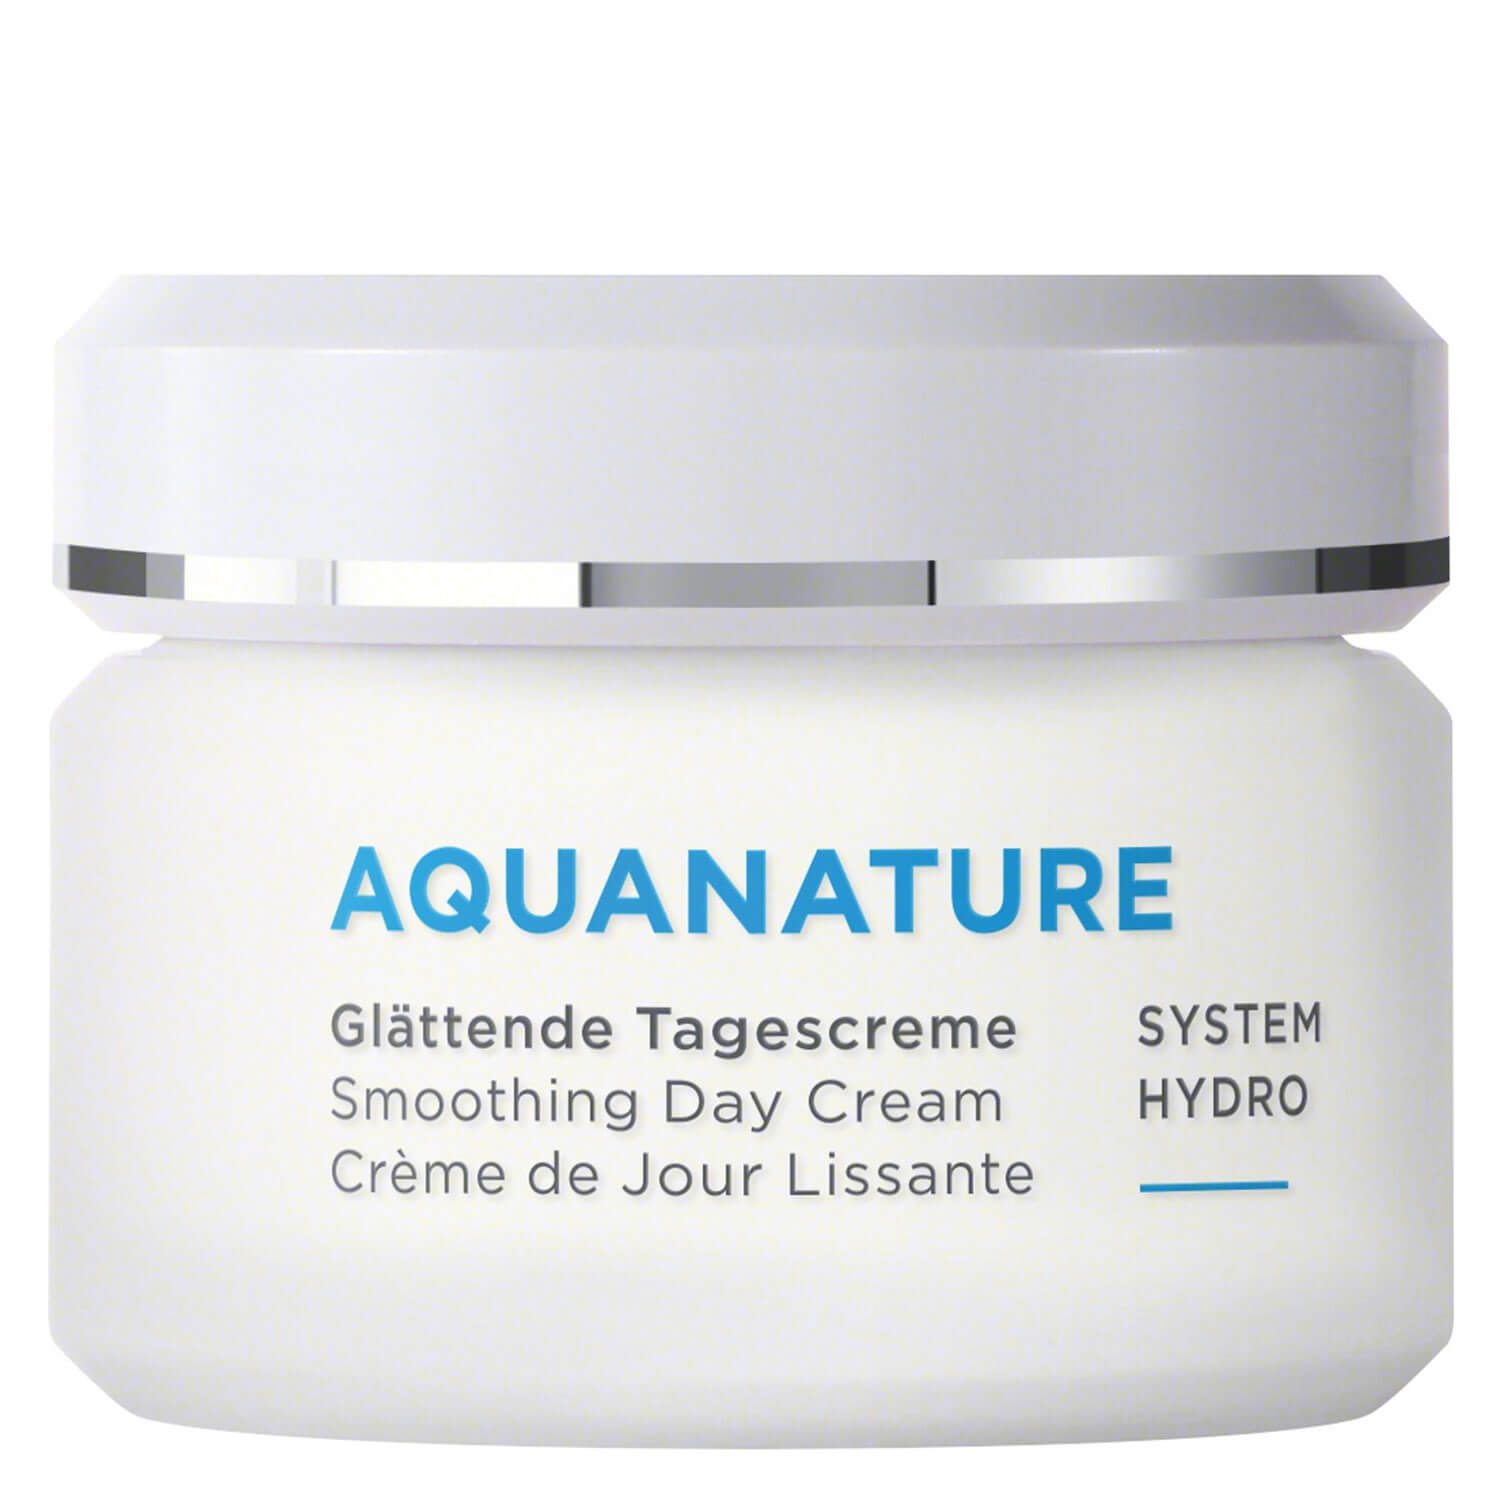 Product image from Aquanature - Glättende Tagescreme